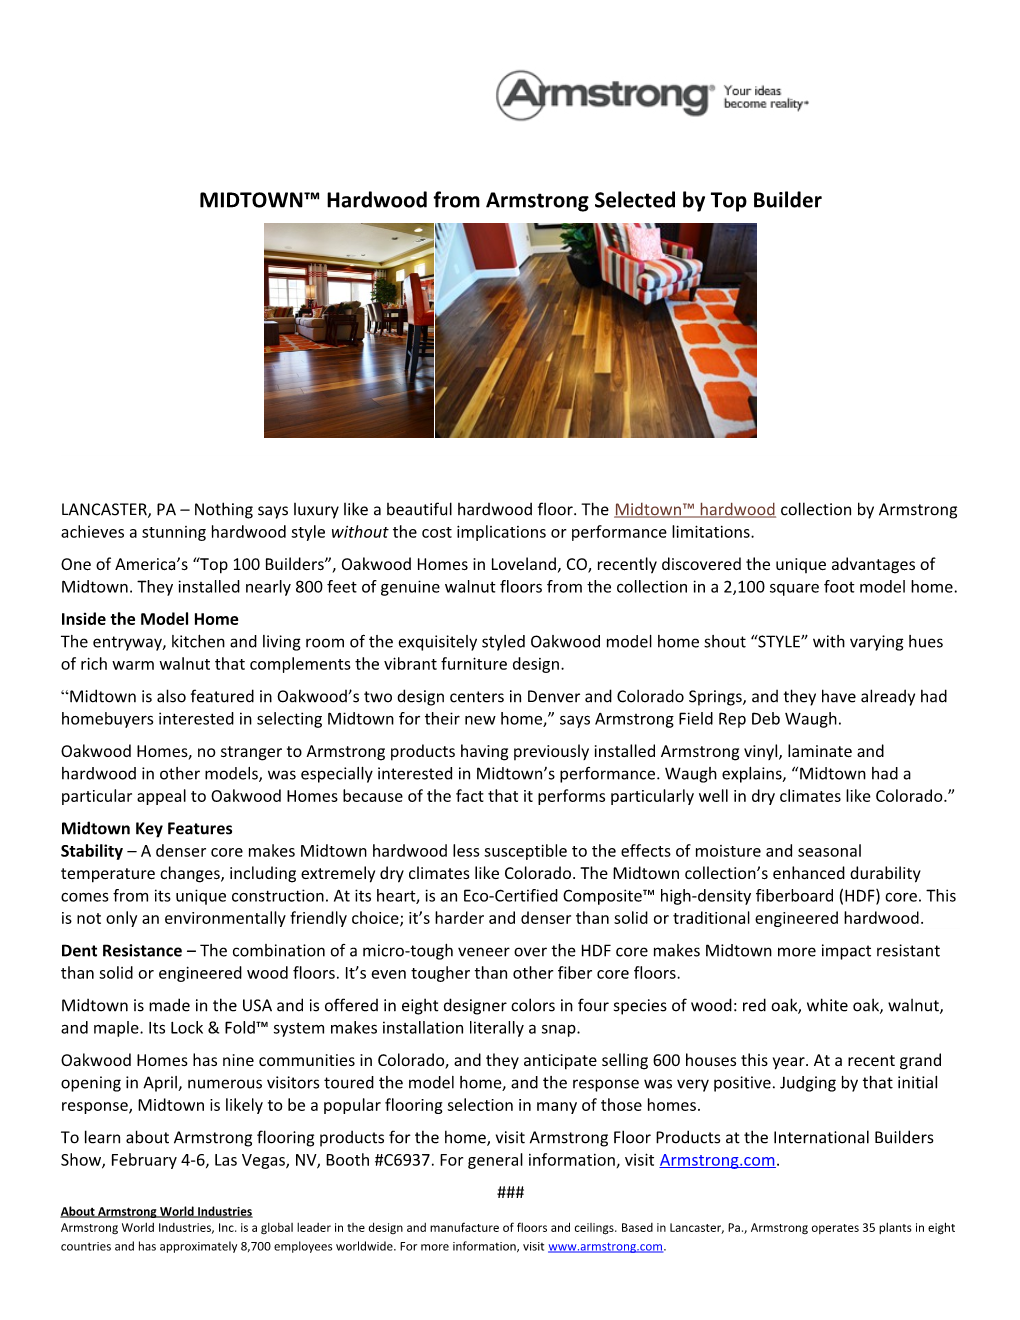 MIDTOWN Hardwood from Armstrong Selected by Top Builder